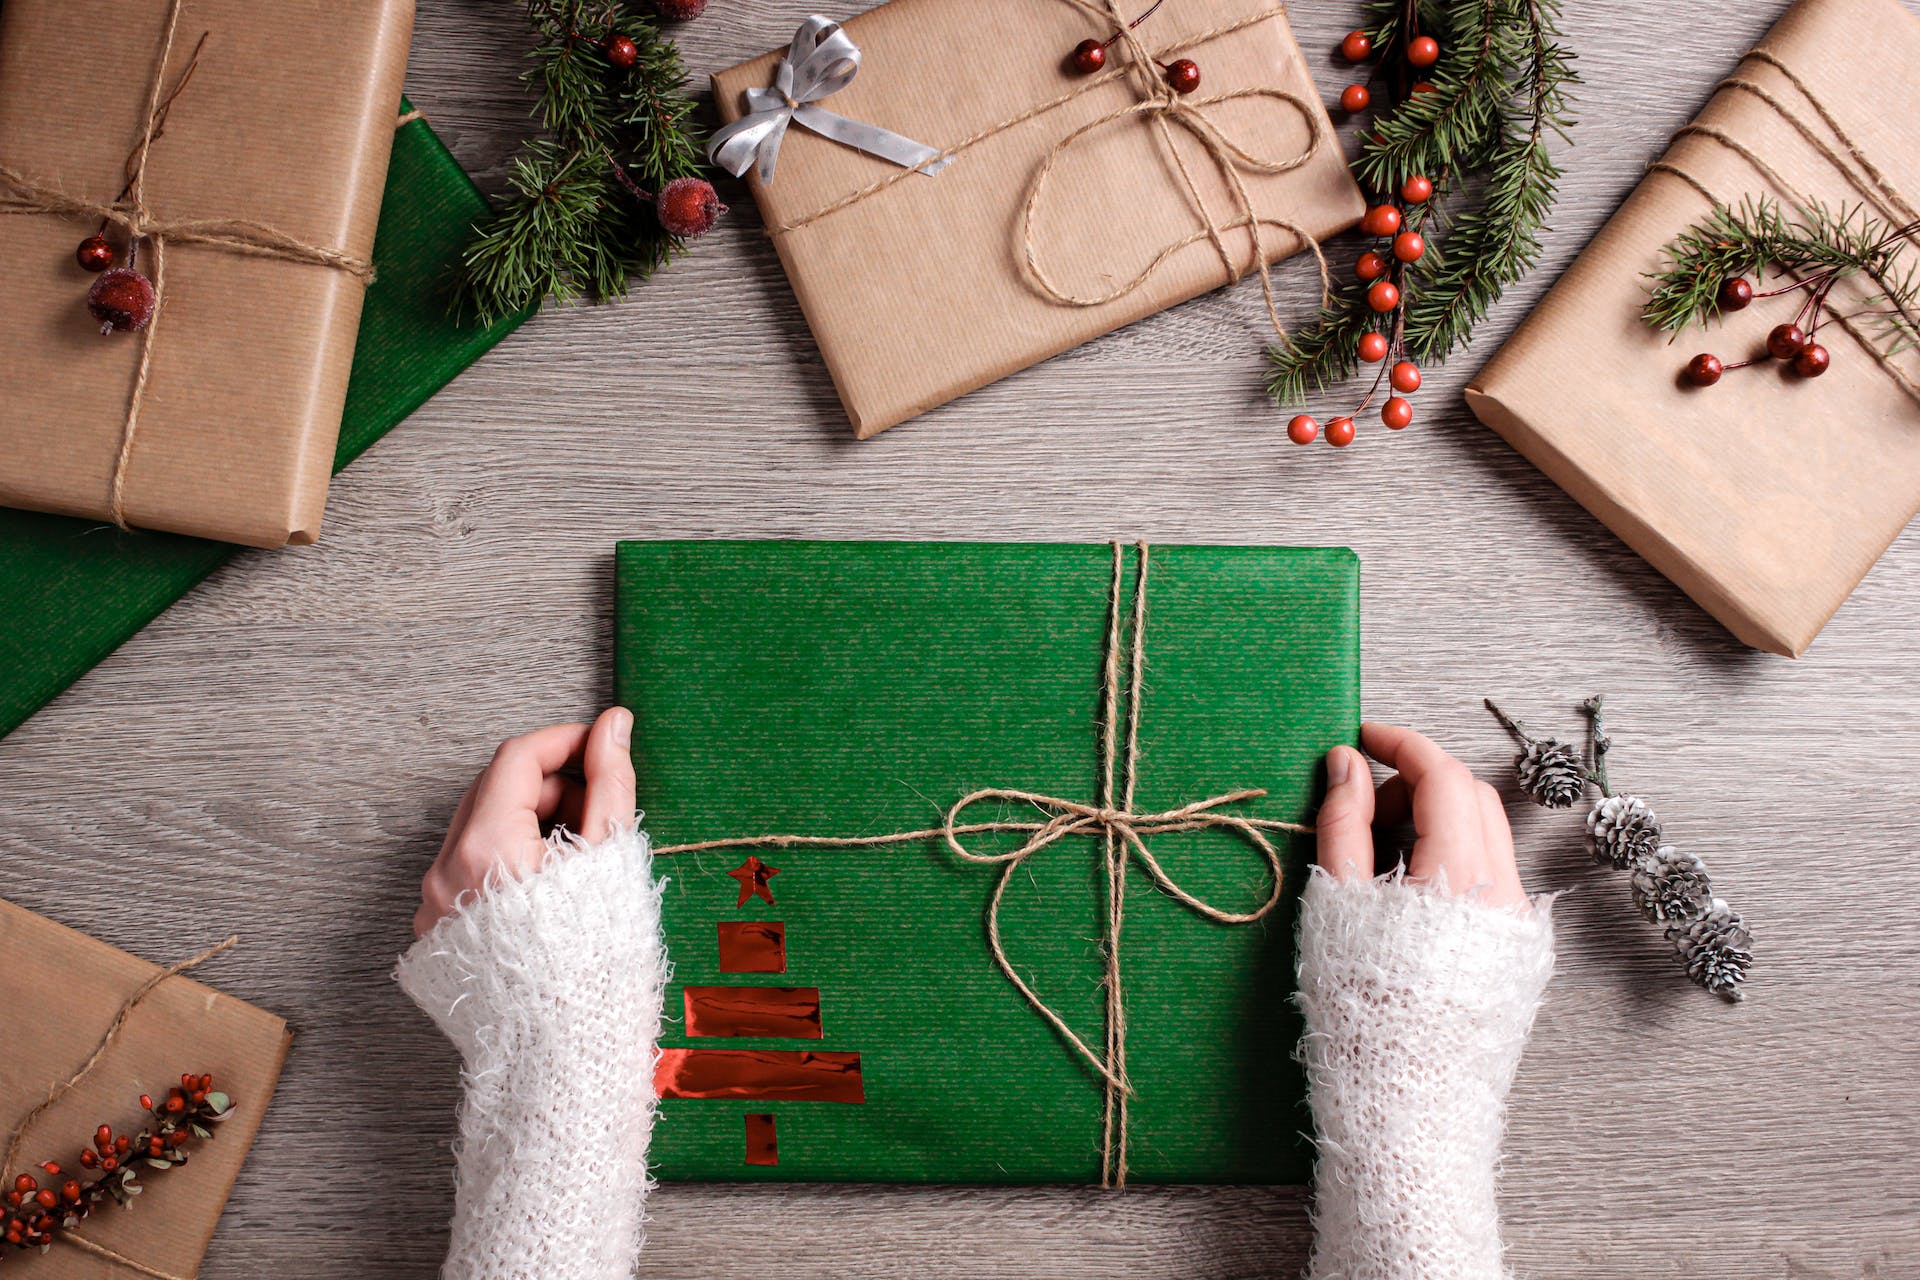 A woman holding a neatly wrapped holiday gift box | Source: Pexels